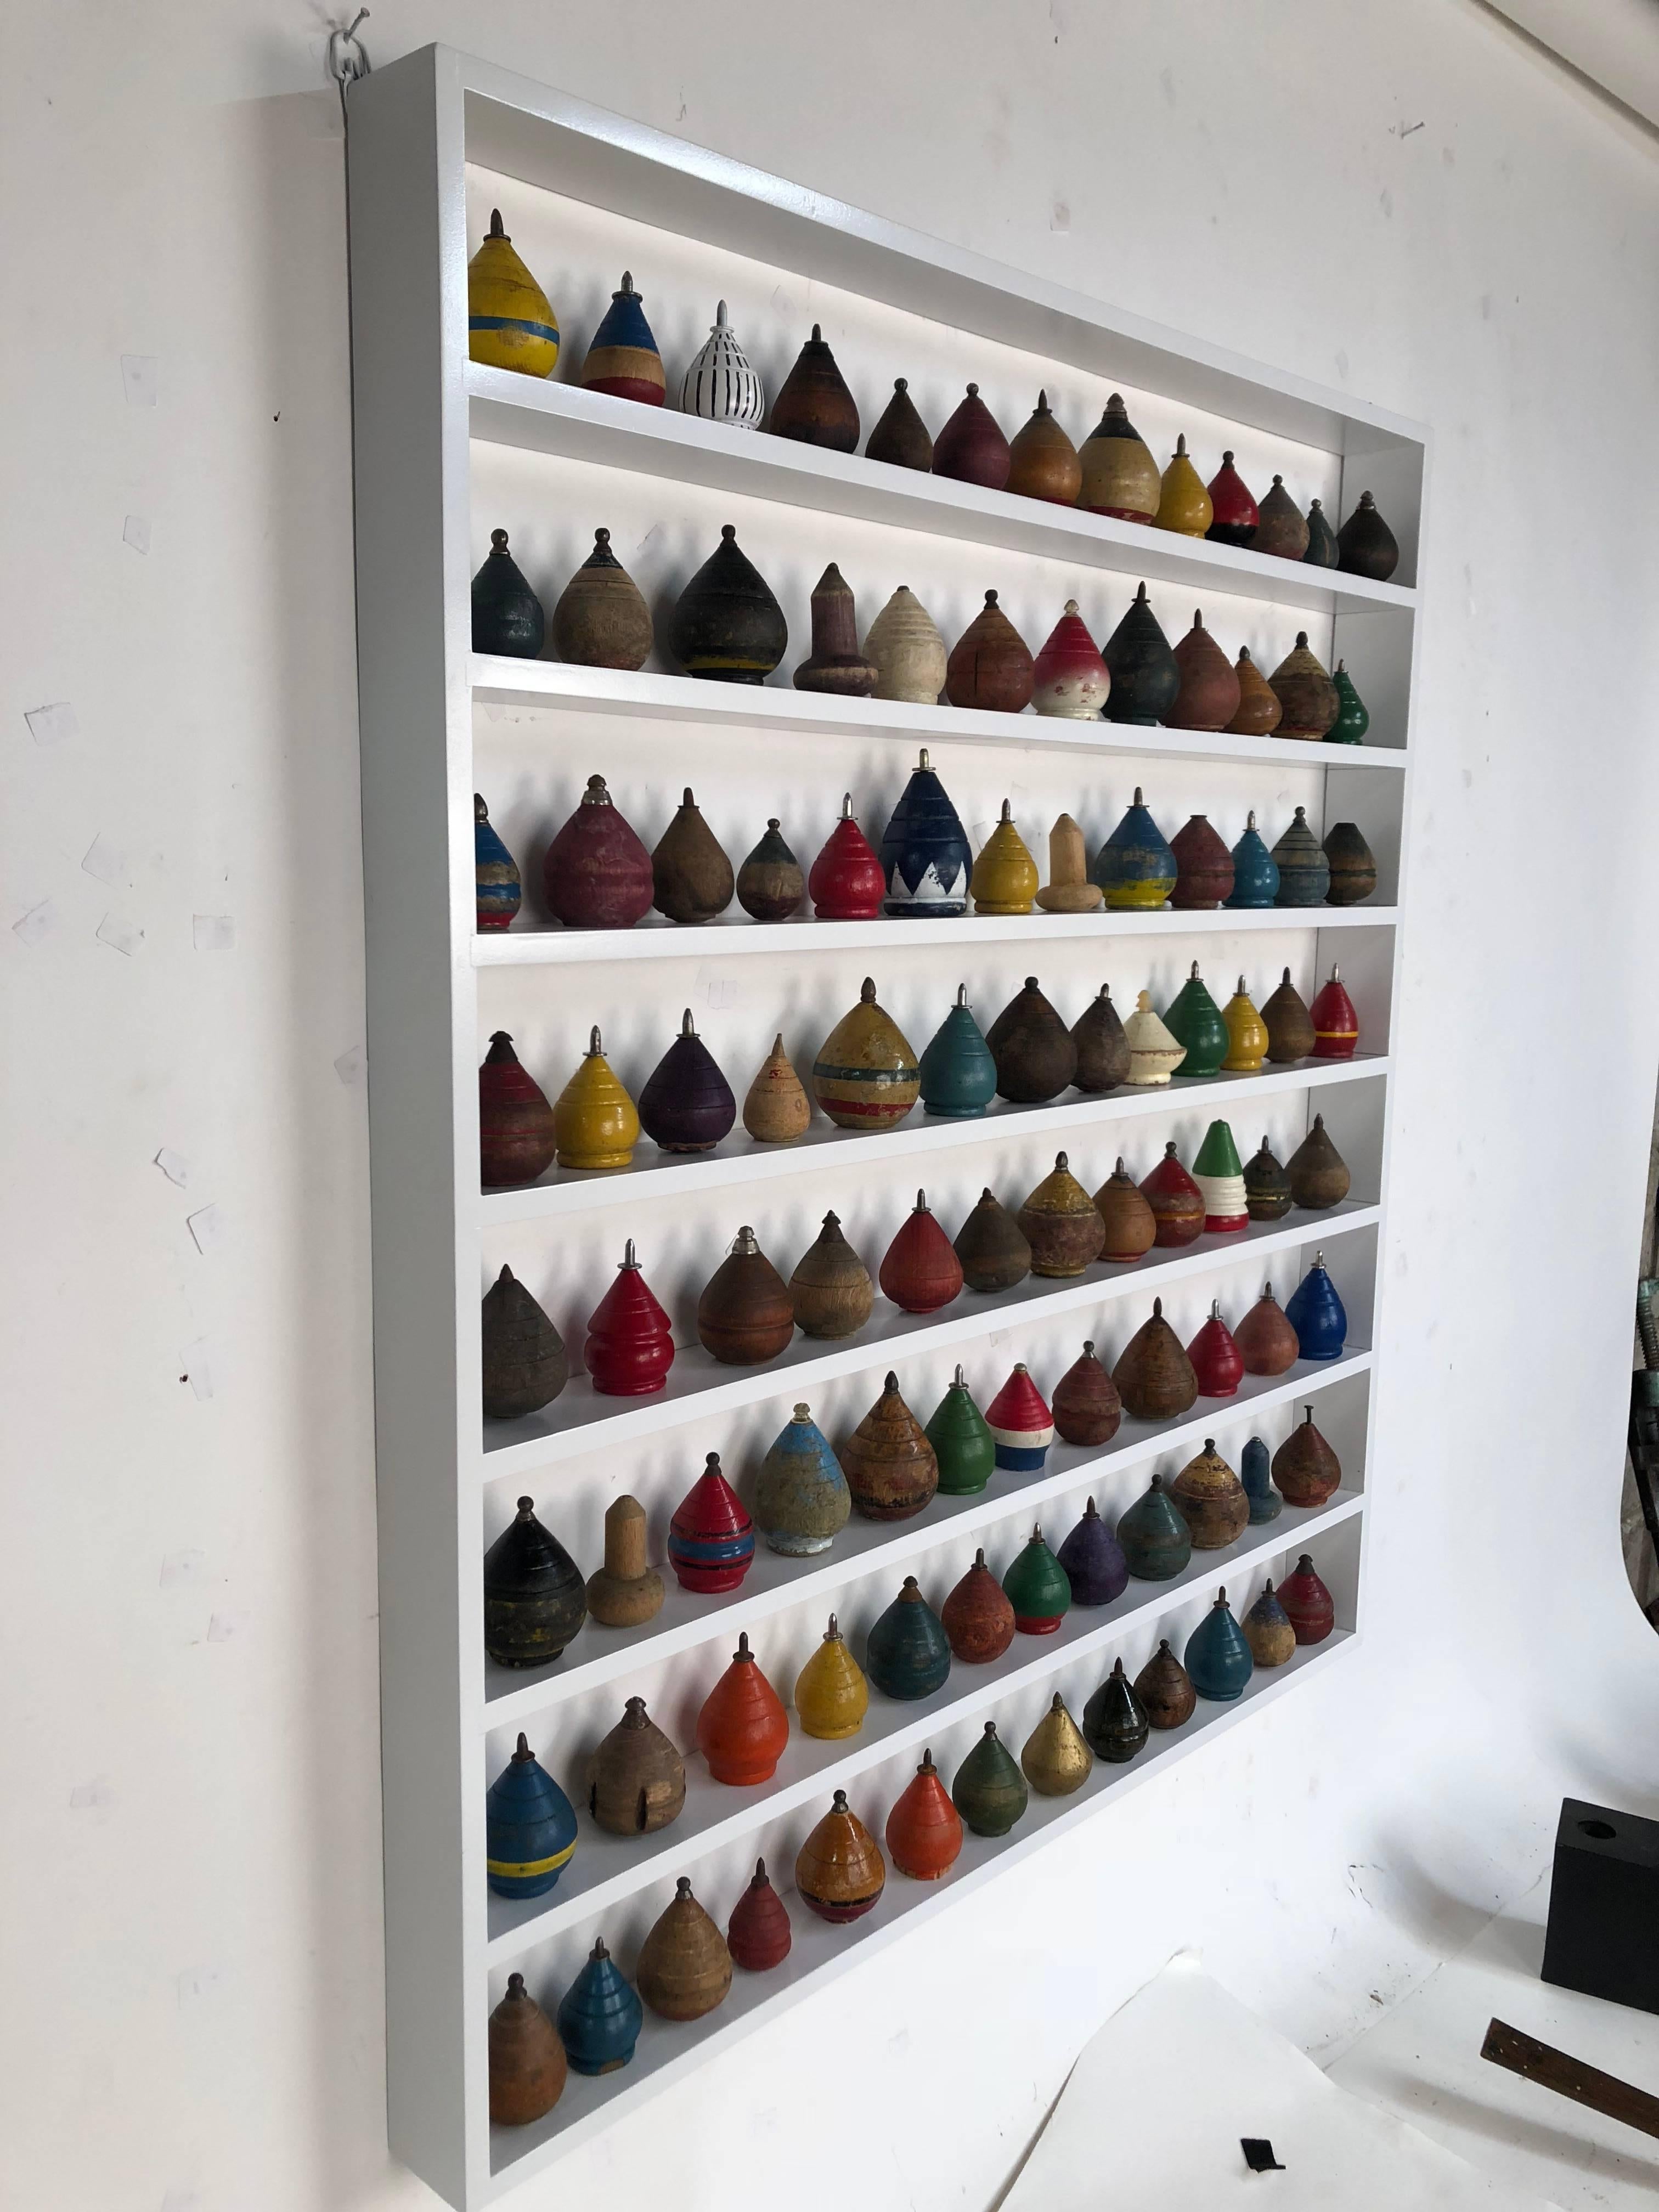 Collection of 100 antique spinning tops in a custom shadow box frame.